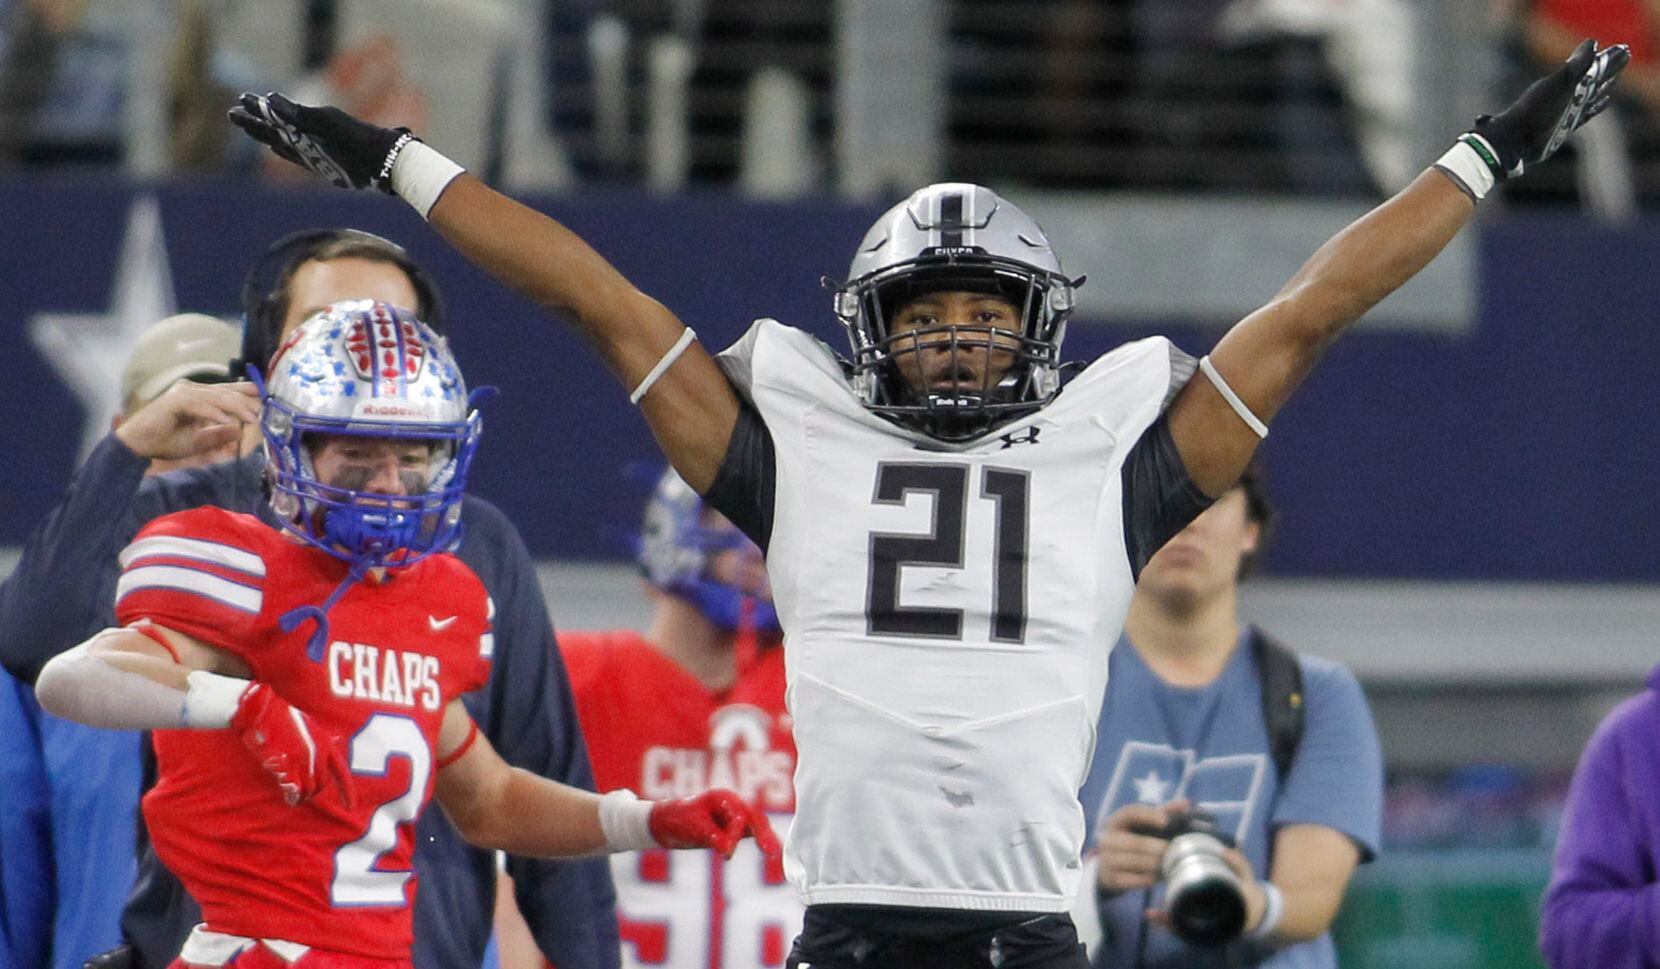 Denton Guyer defensive back Ryan Yaites (21) gestures after breaking up a pass intended for...